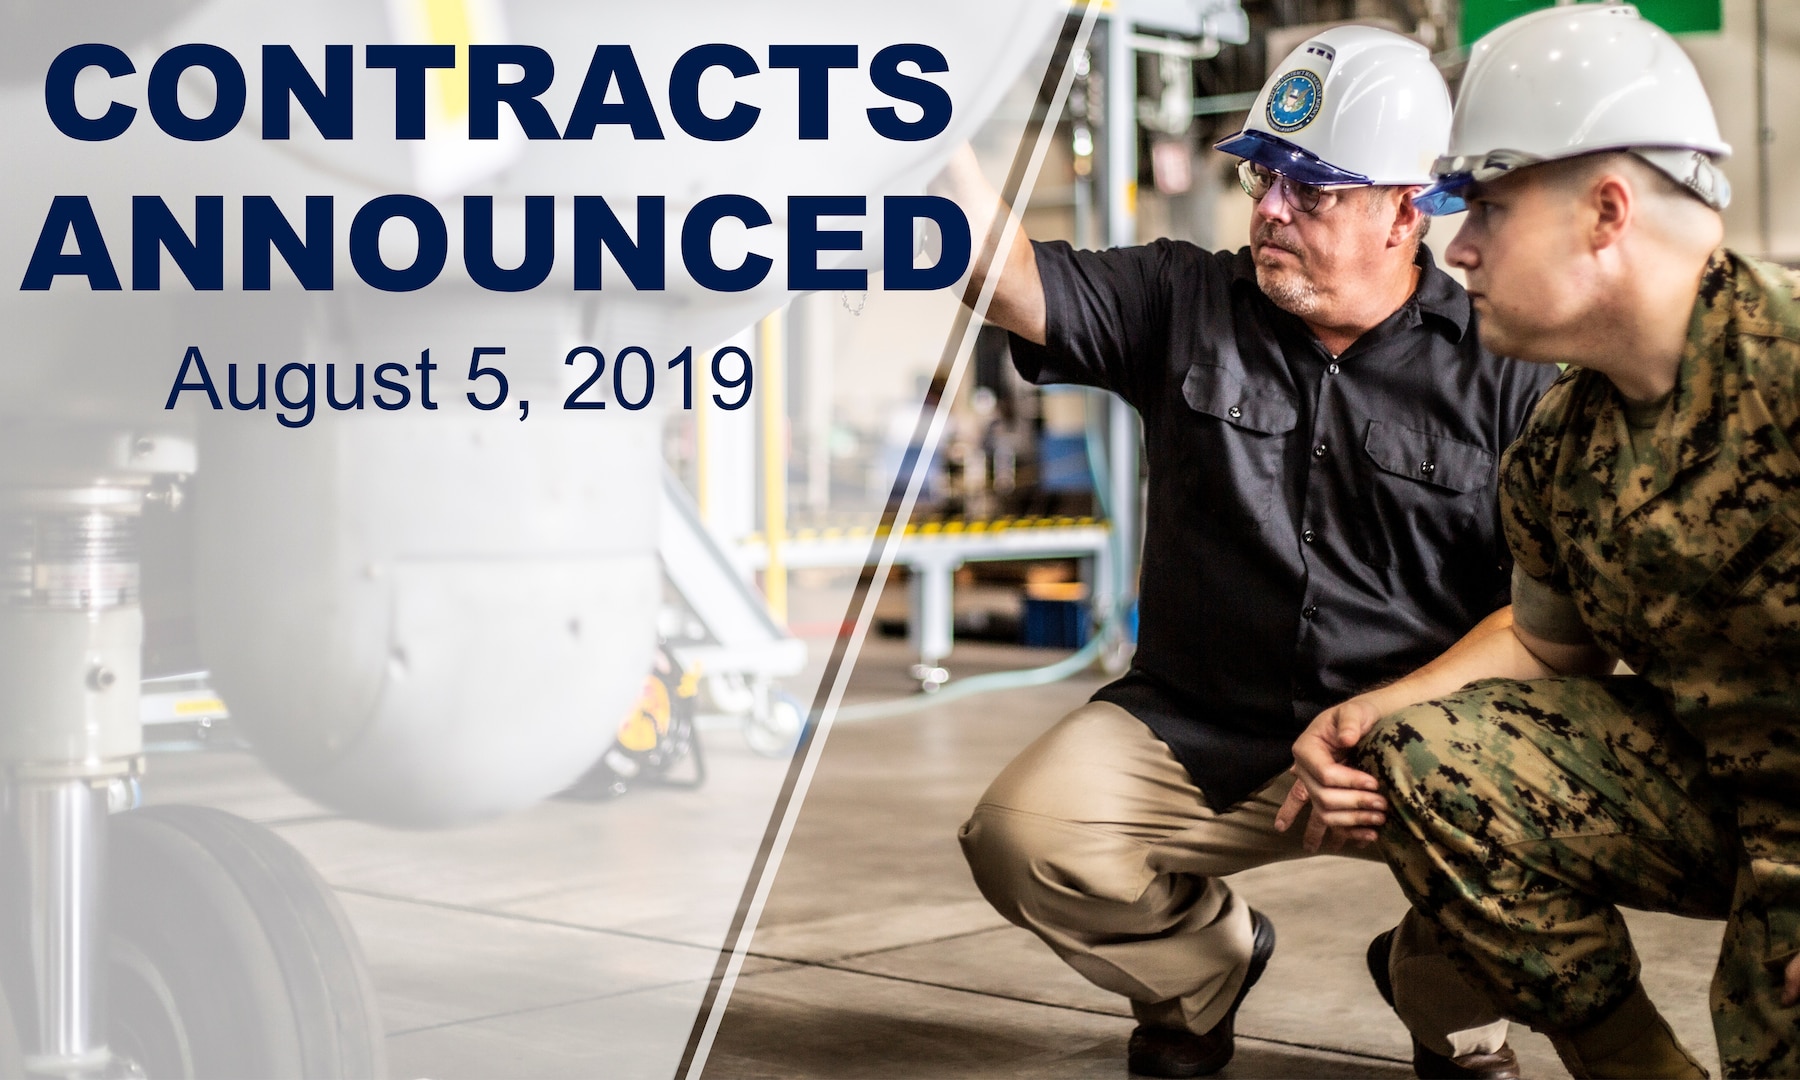 Two men inspect an aircraft. Text on photo says: "Contracts Announced August 5, 2019"